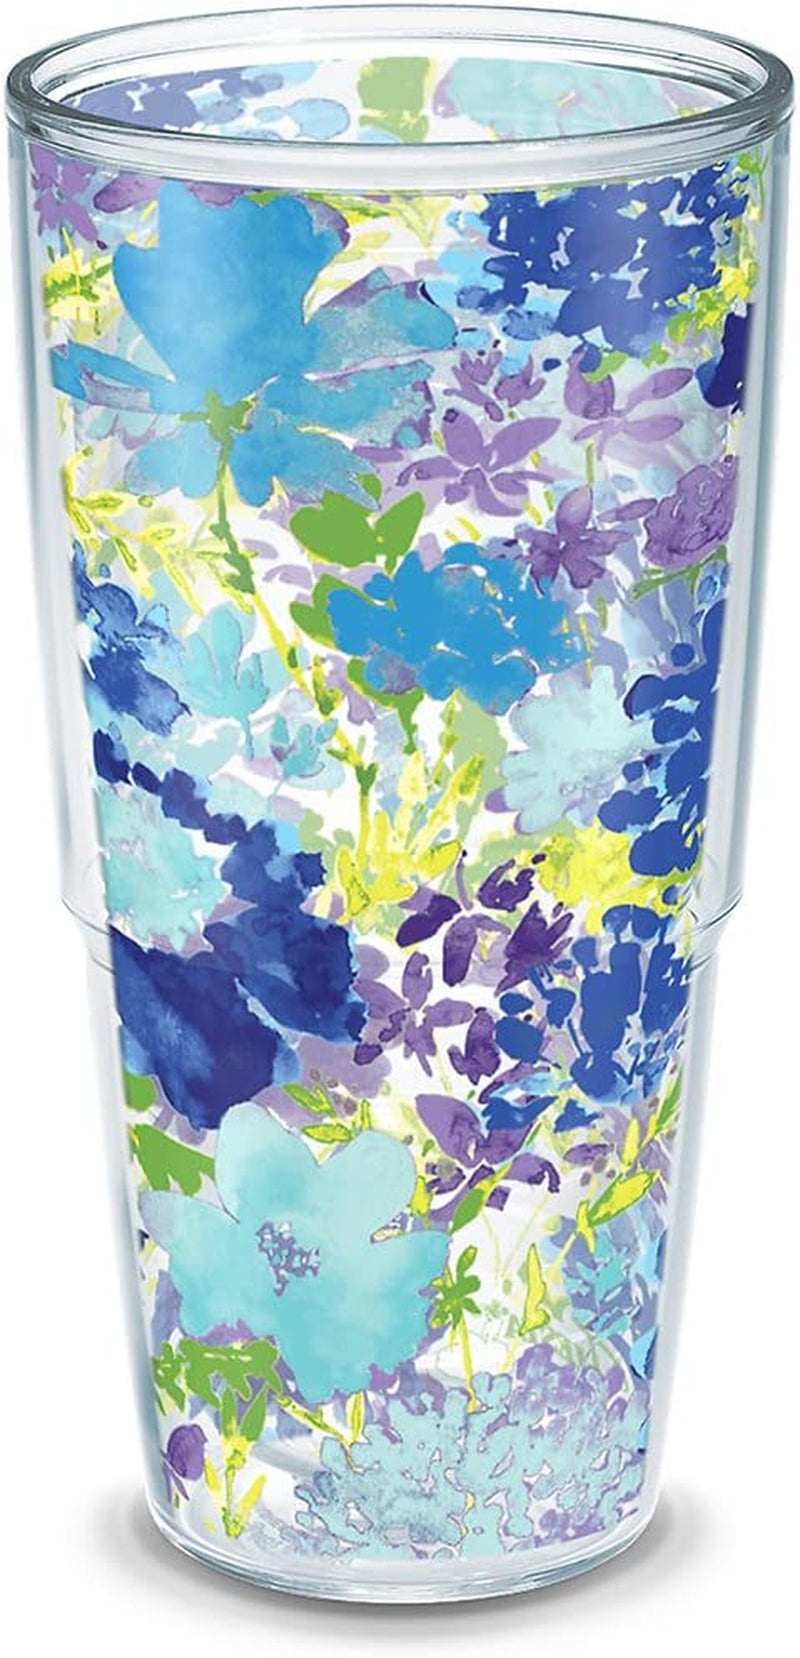 Tervis Made in USA Double Walled Fiesta Insulated Tumbler Cup Keeps Drinks Cold & Hot, 16Oz Mug - Purple Lid, Purple Floral Home & Garden > Kitchen & Dining > Tableware > Drinkware Tervis Classic - Unlidded 24oz 